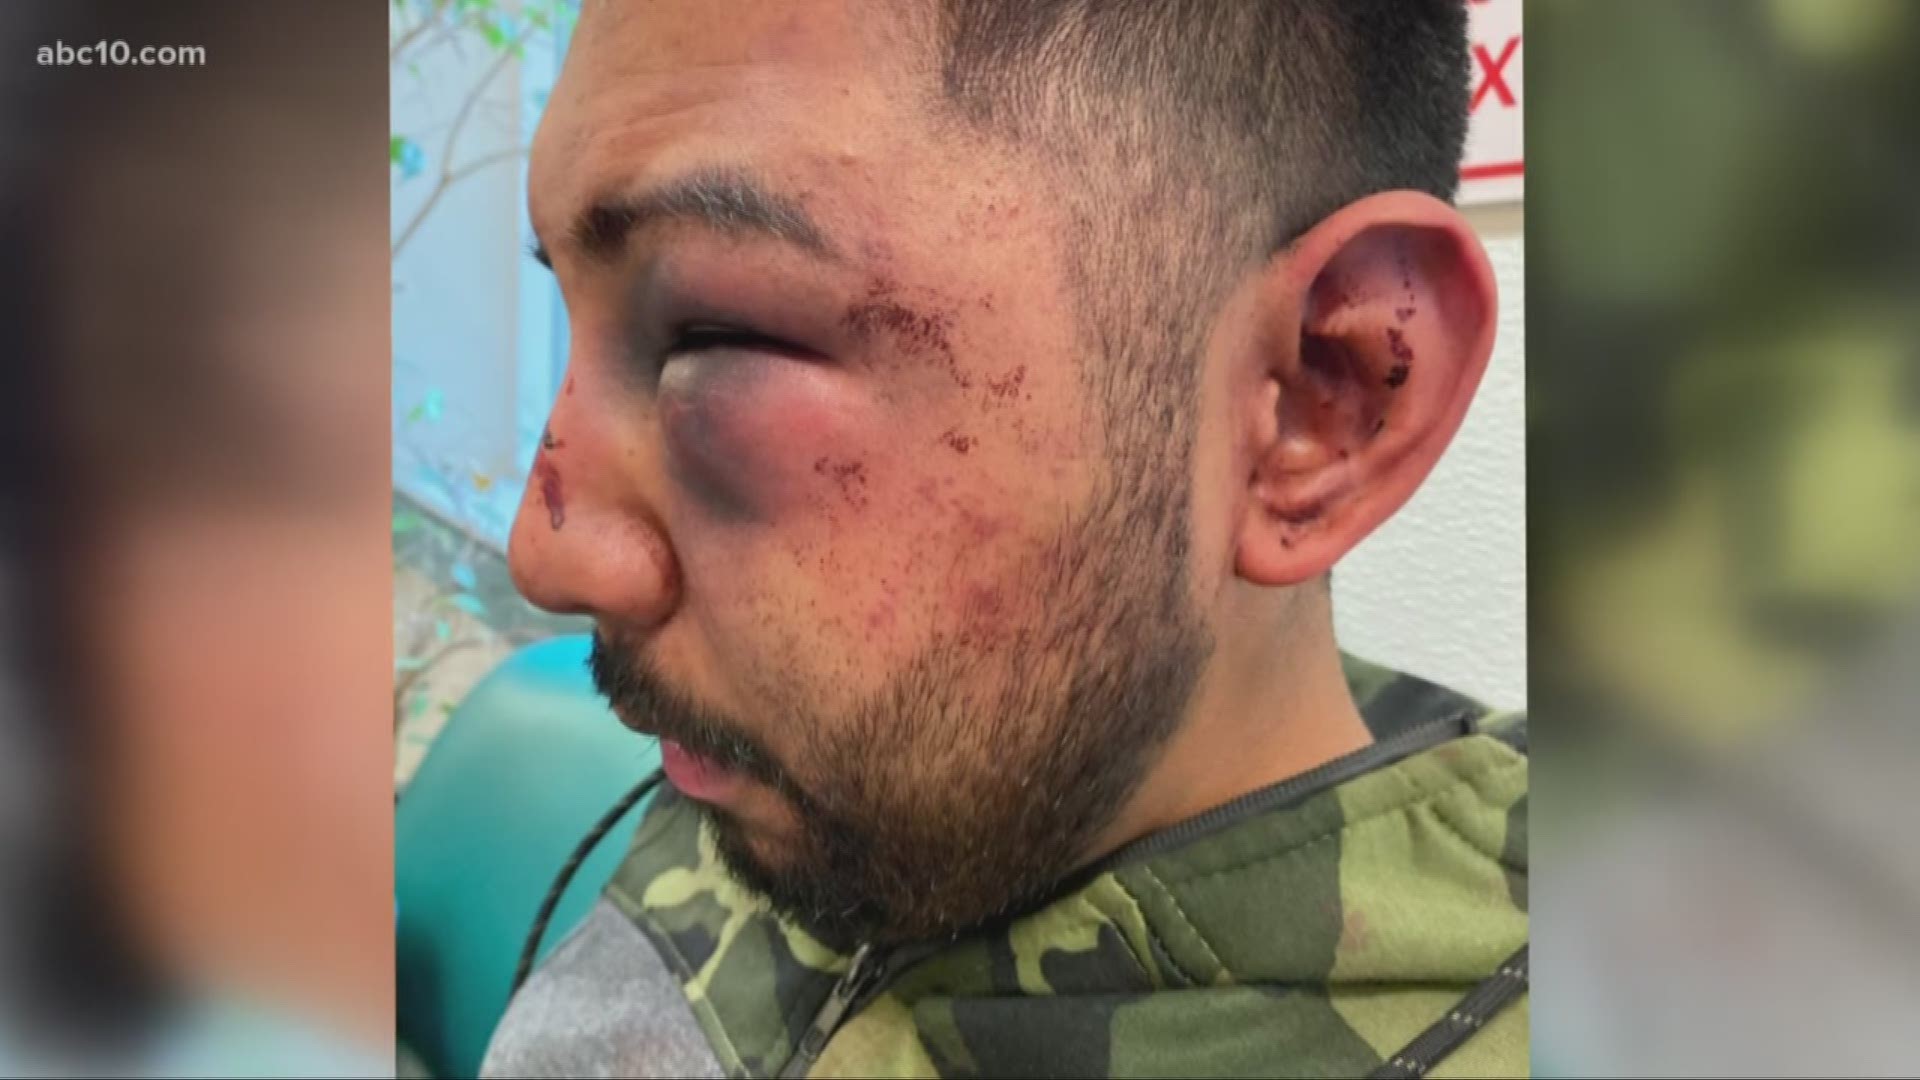 Jacob Servin was facing five counts of battery on a custodial officer after he was allegedly beaten and bloodied by officers inside of the San Joaquin County Jail.